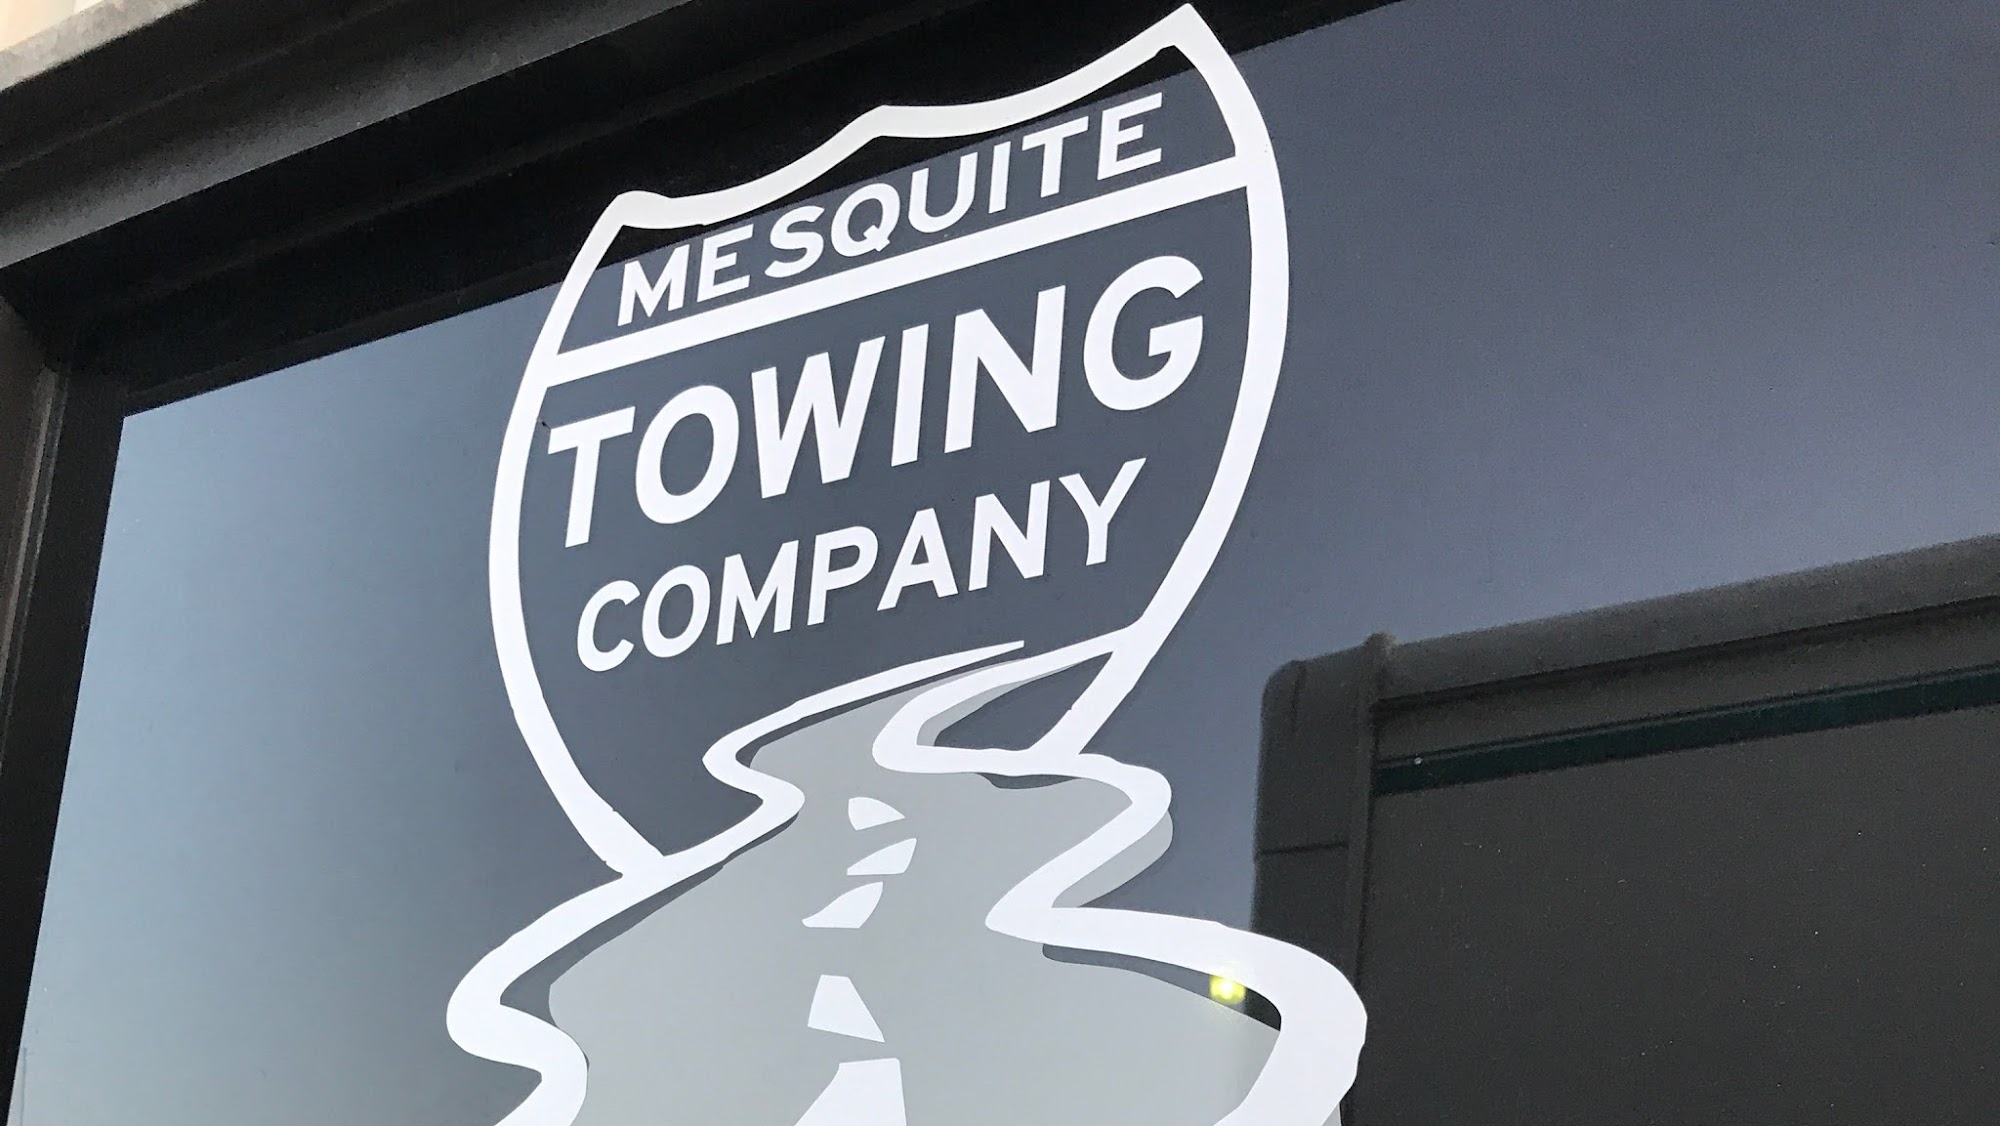 Mesquite Towing Company